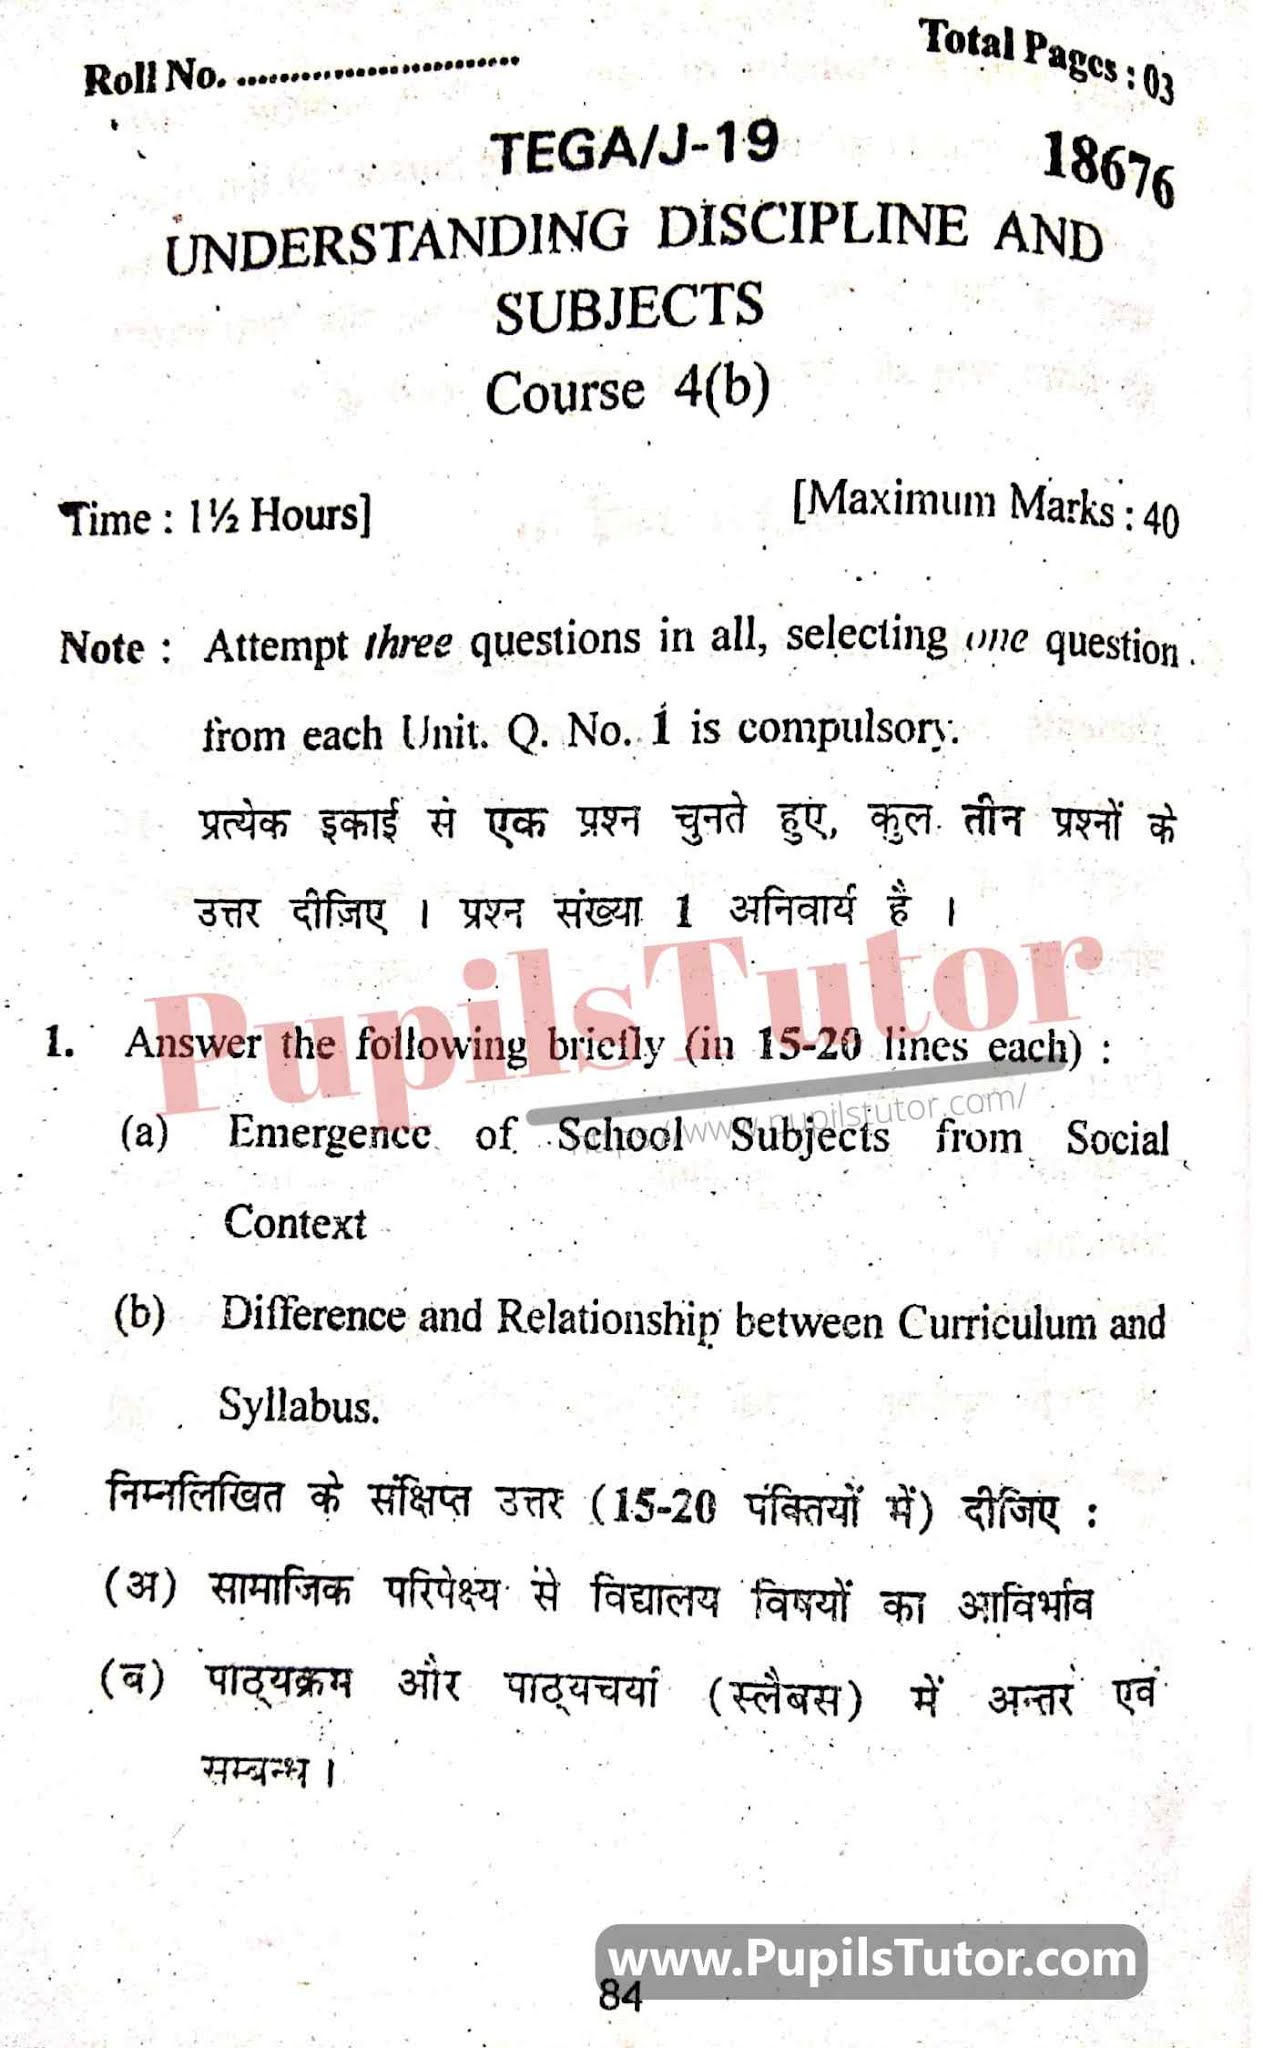 KUK (Kurukshetra University, Haryana) Understanding Discipline And Subjects Question Paper 2019 For B.Ed 1st And 2nd Year And All The 4 Semesters In English And Hindi Medium Free Download PDF - Page 1 - Pupils Tutor